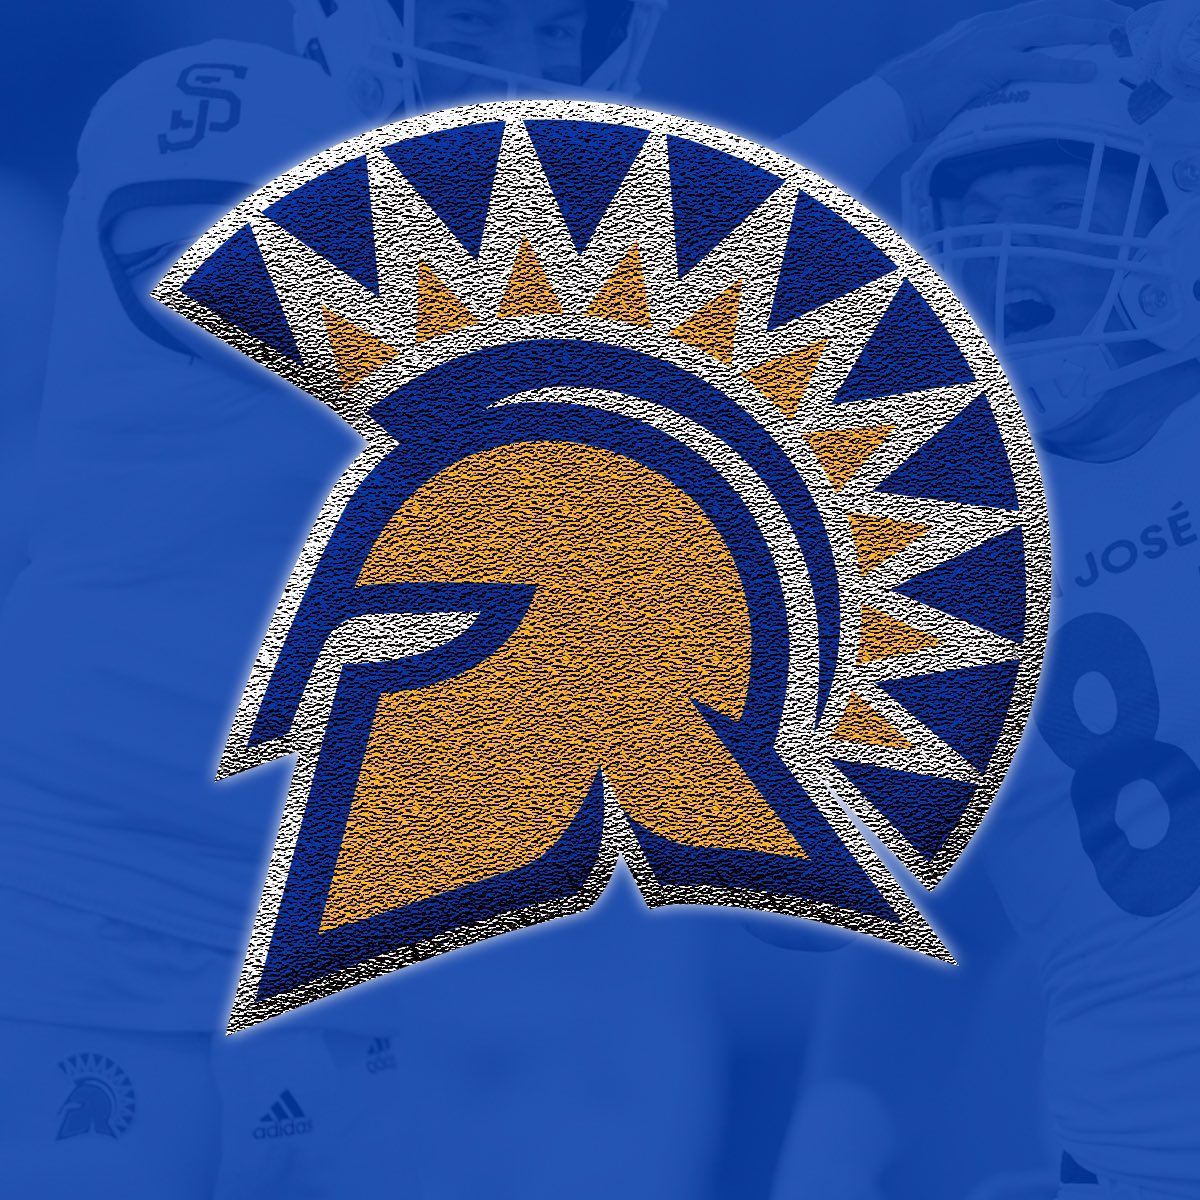 Thank you to @CoachMikeJudge from @SanJoseStateFB For stopping by Folsom today. We appreciate you! #GoBullDogs @CoachTravisFHS @coach_angel3 @CoachIrsik1